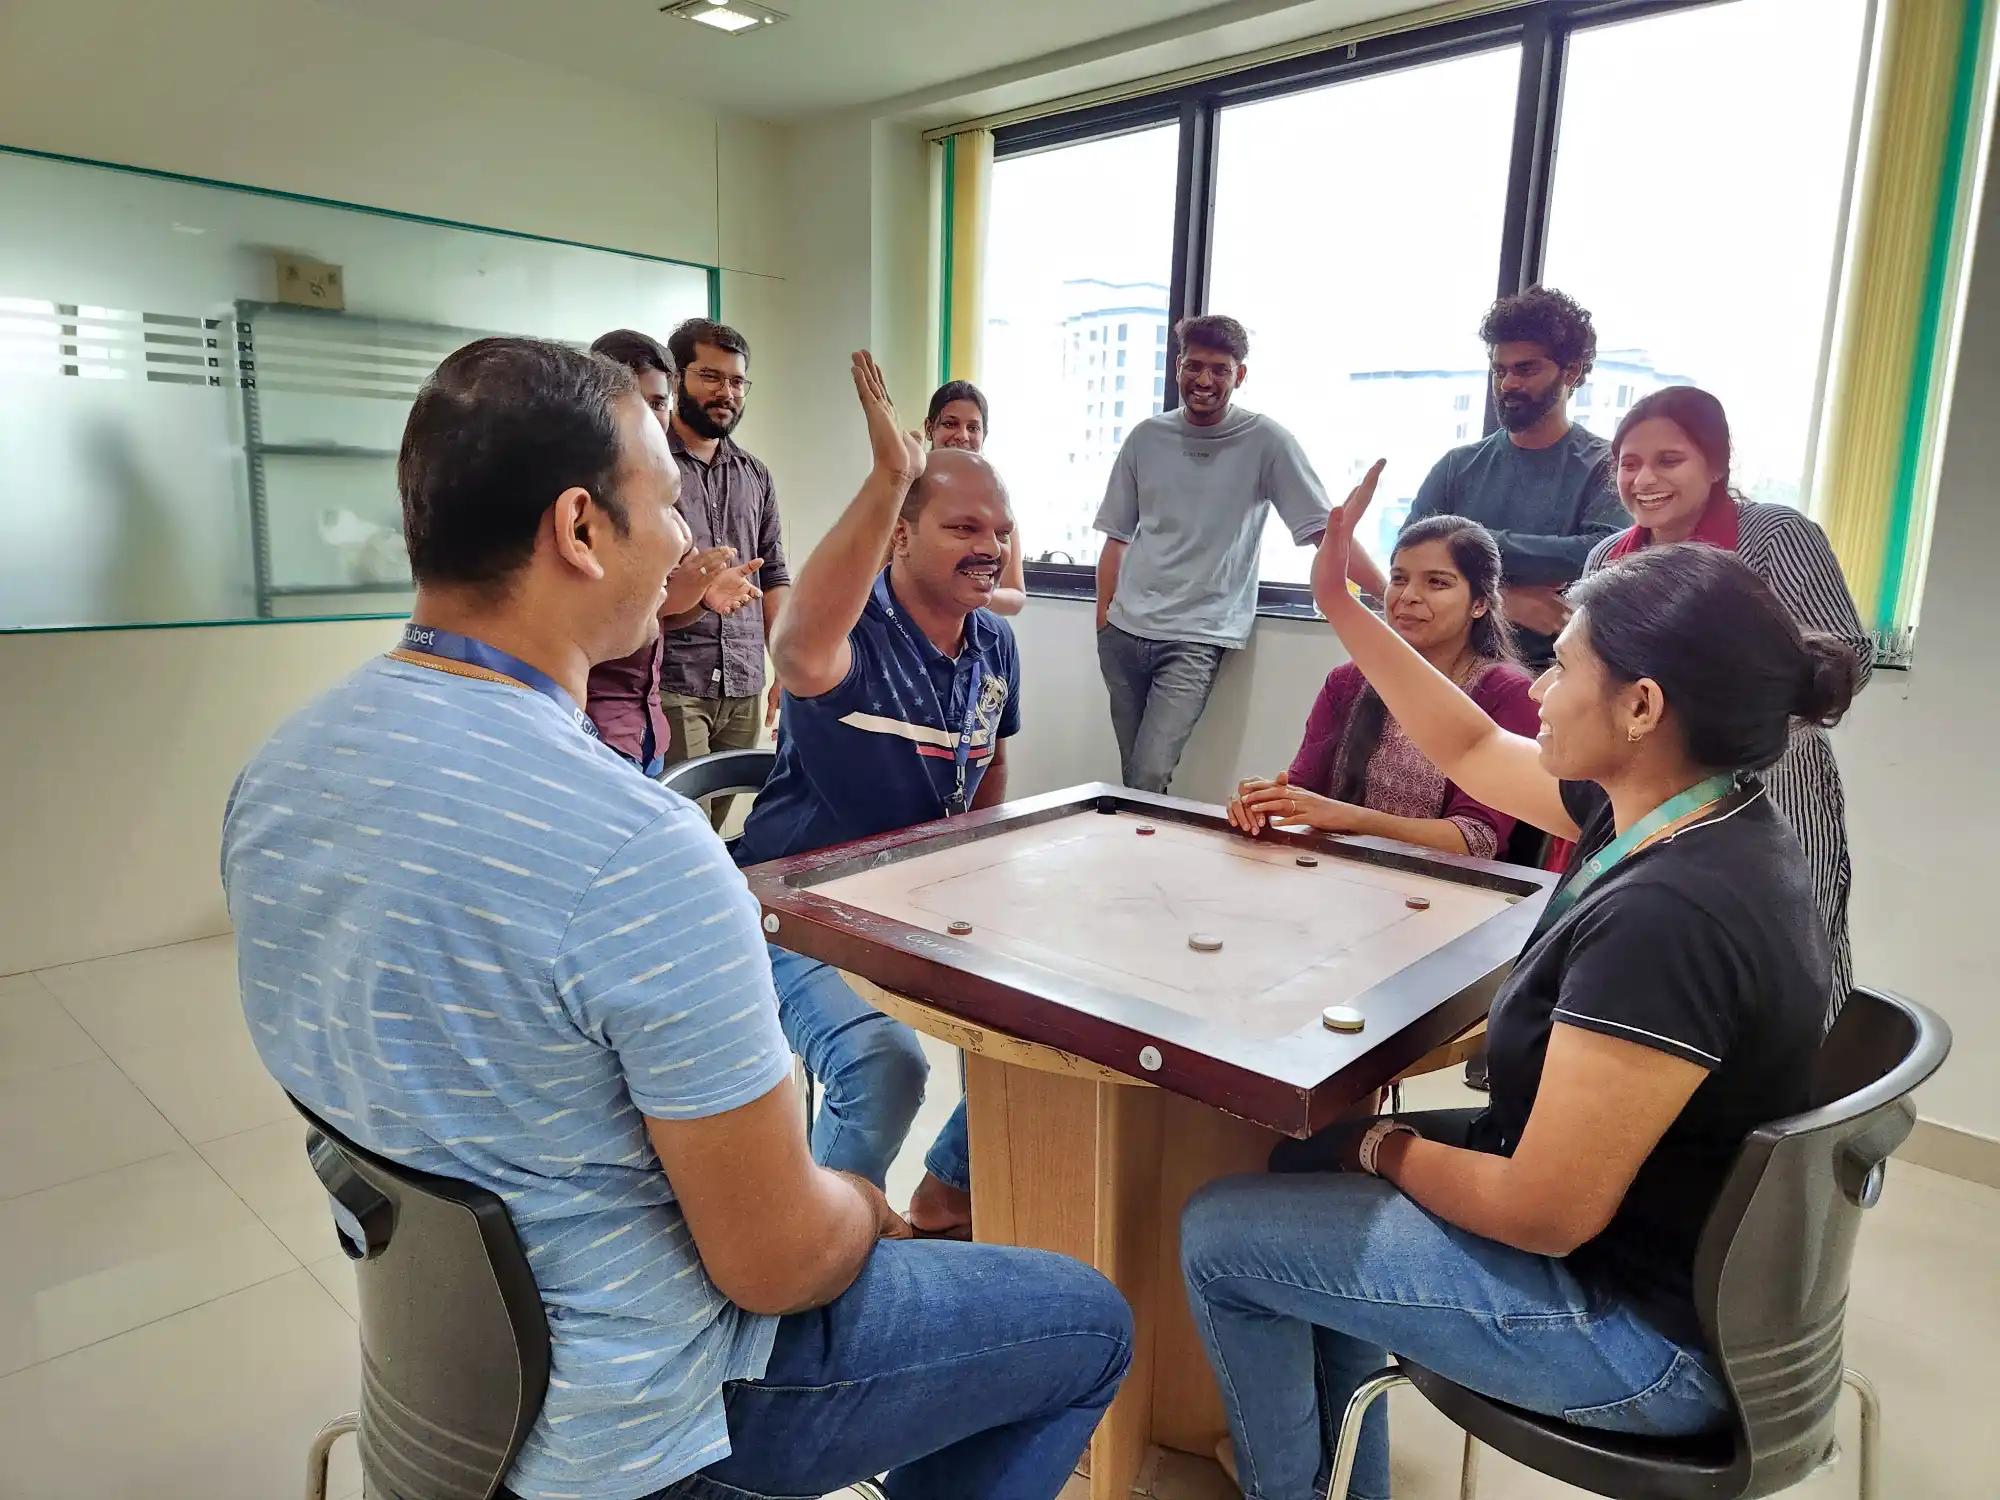 A winning moment from the Carrom tournament.